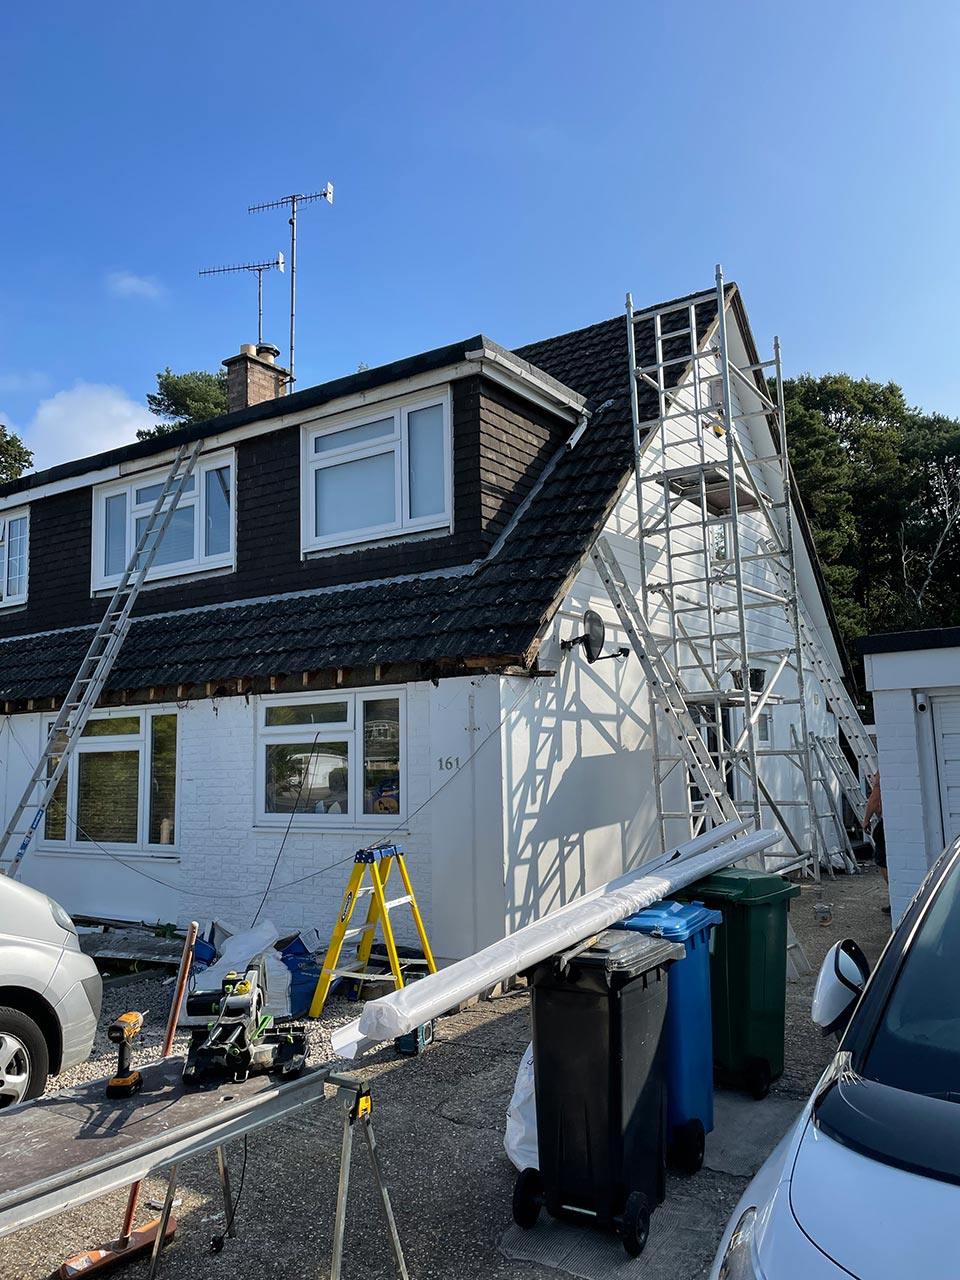 New PVC Gutters Installation in Process to House in Poole - Emerald Builders Ltd